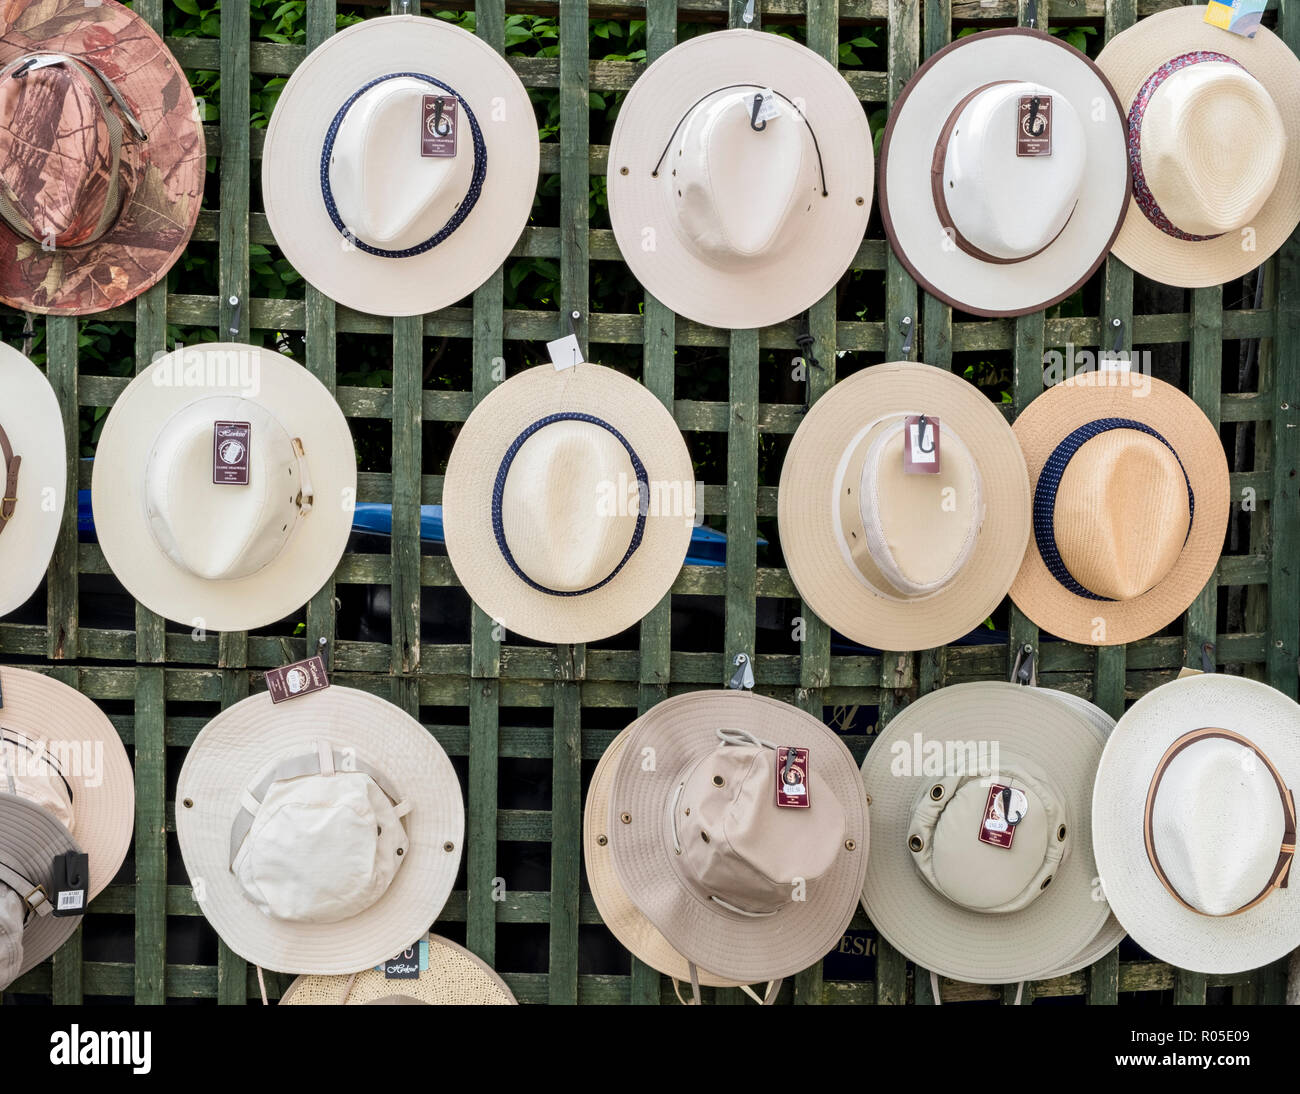 Men's hats for sale and on display outside, England, UK Stock Photo